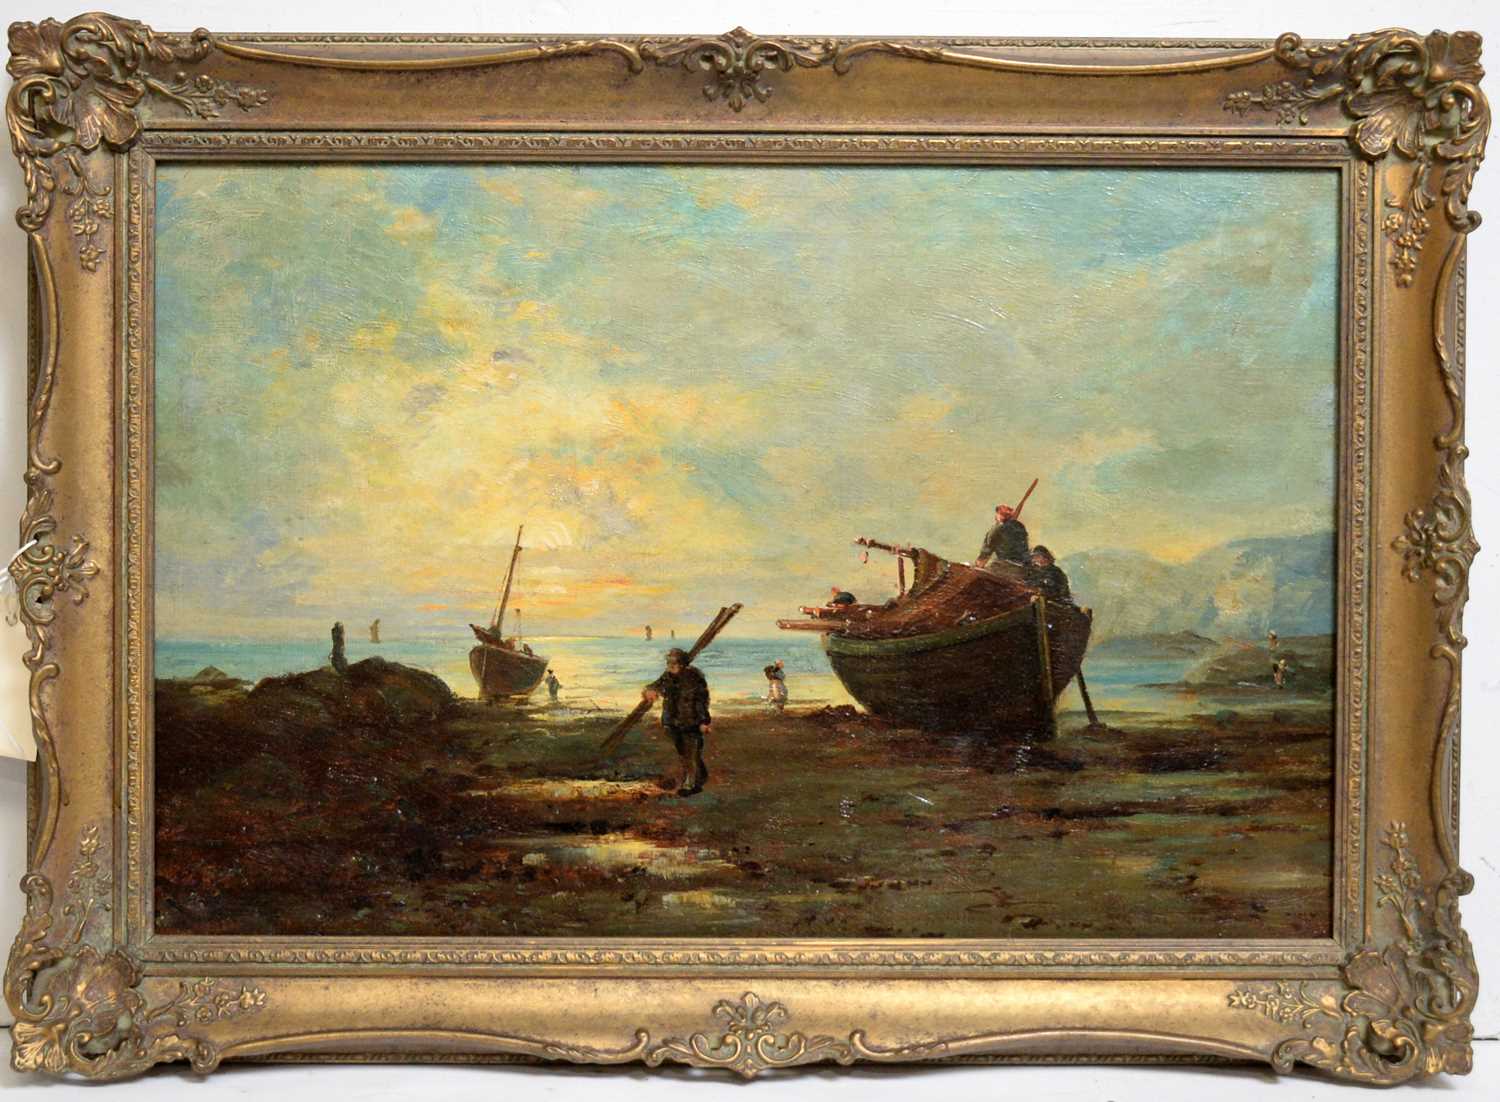 Lot 285 - Attributed to Samuel 'Sam' Bough - oil